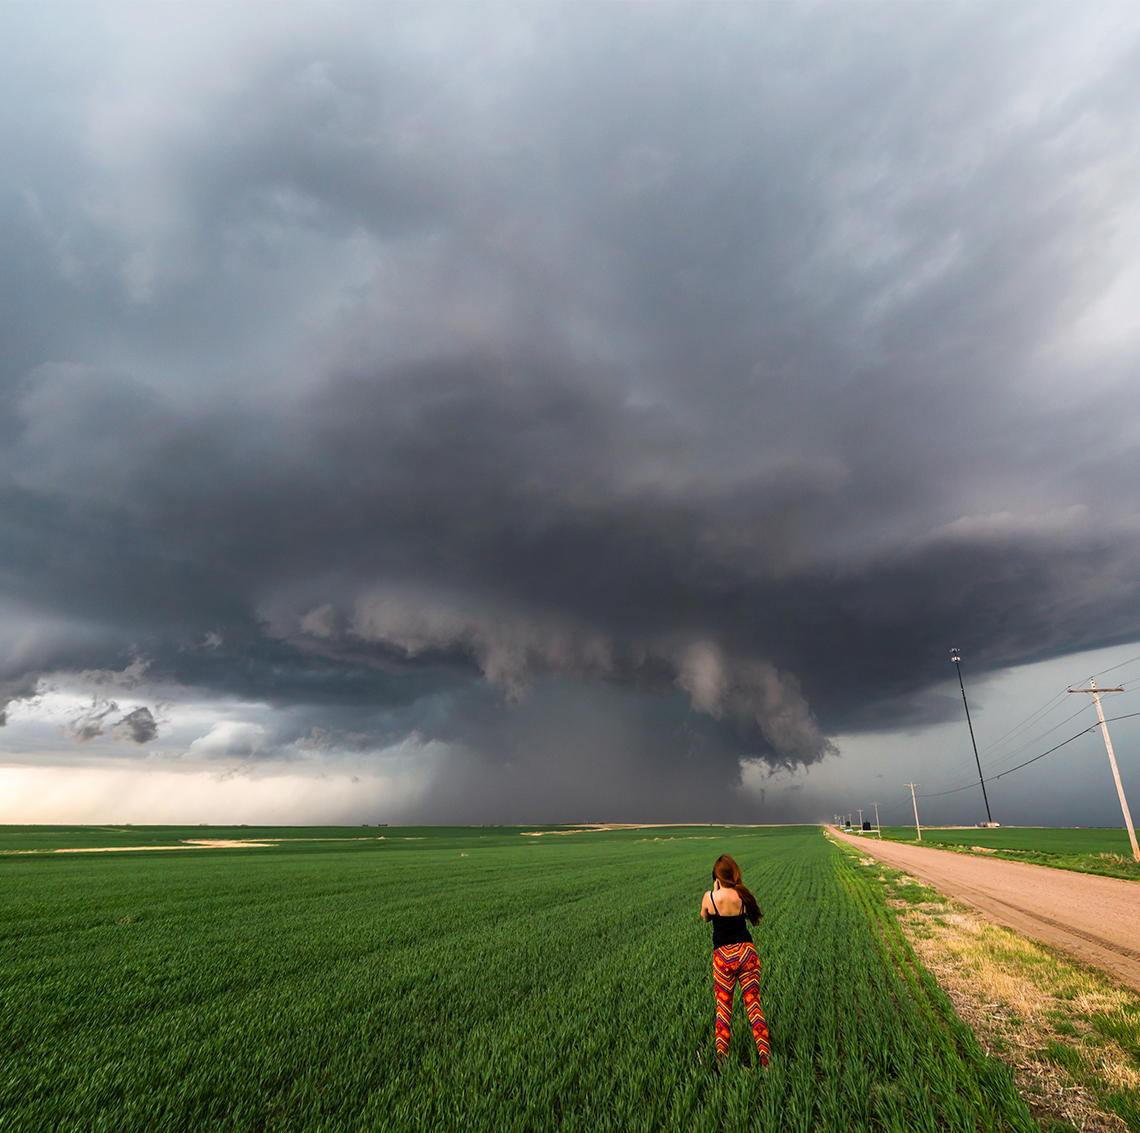 These Women Risk Their Lives to Photograph the Most Severe, Dangerous Storms America Has Ever Seen